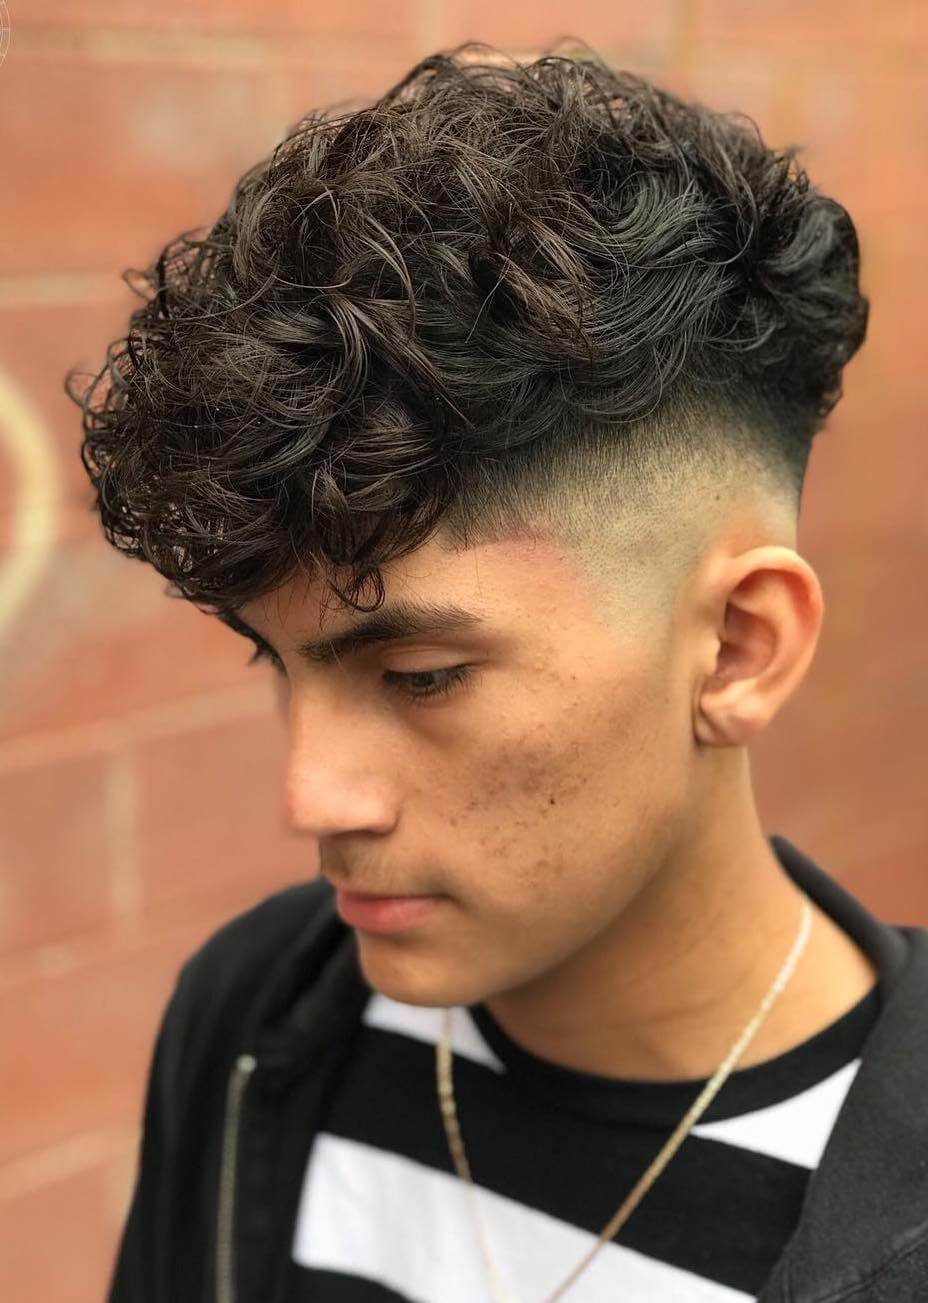 High platform haircut with shaved sides and a voluminous top, adding height and drama to the style